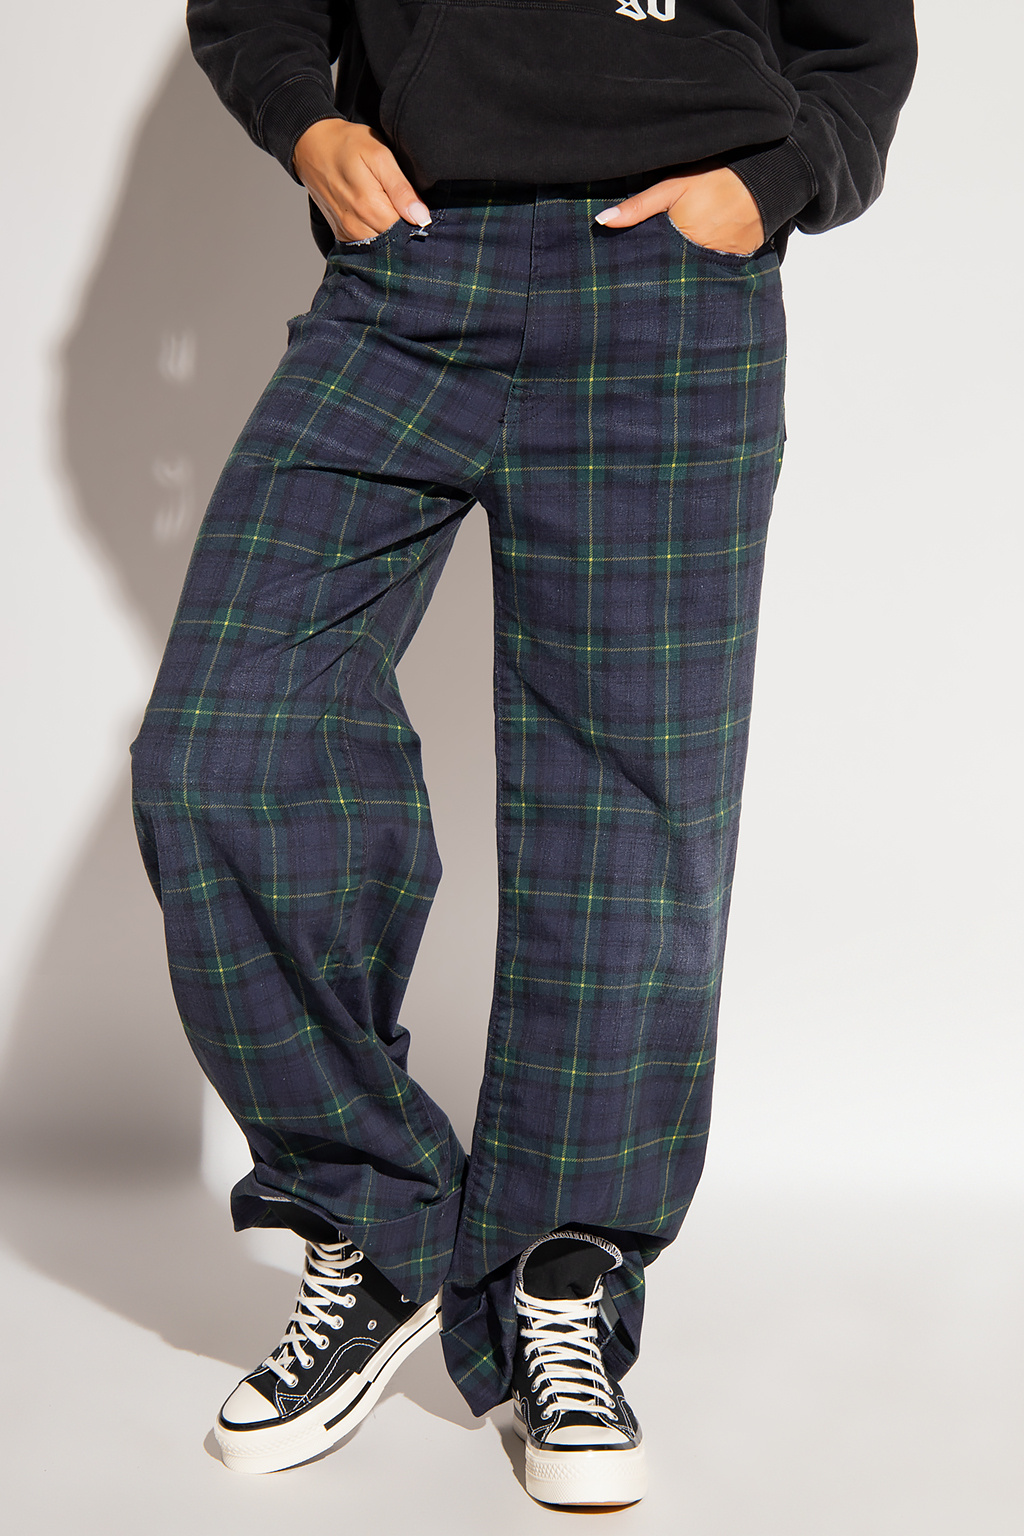 ELLIS  Moss Green Check Tweed Trousers  Marc Darcy